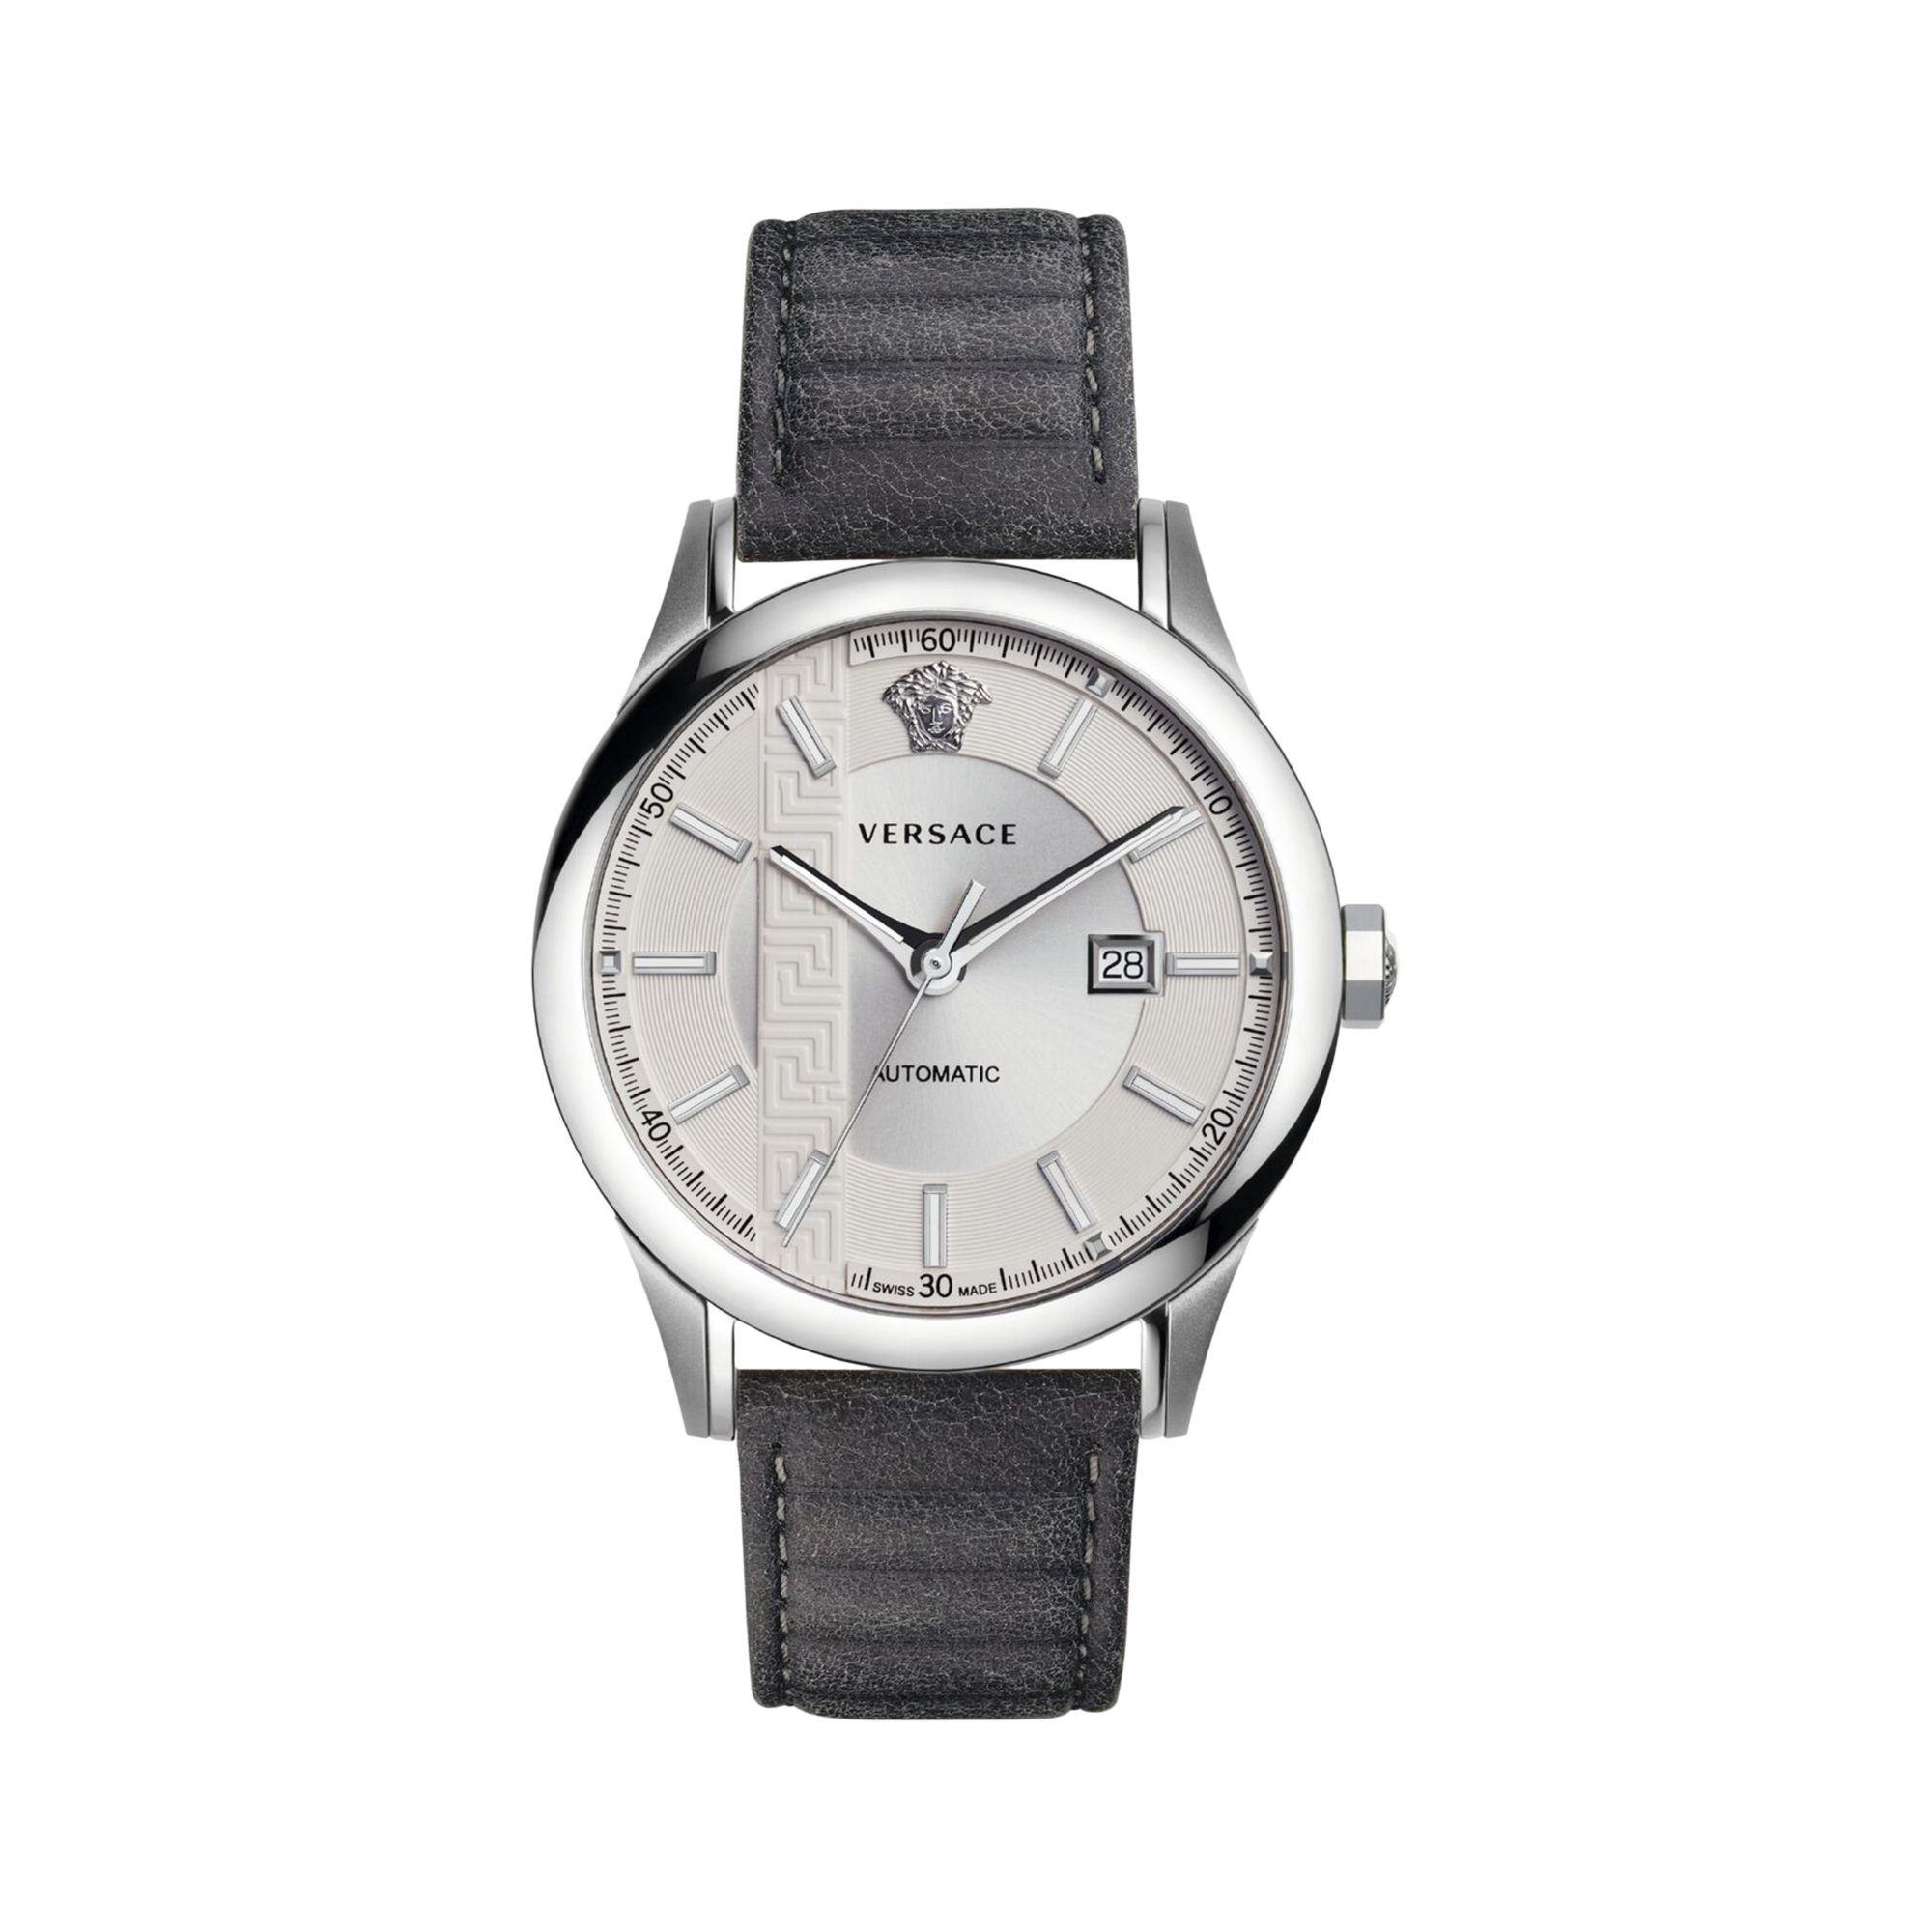 Versace Aiakos Automatic Leather Strap Watch in Grey (Gray) for Men - Lyst